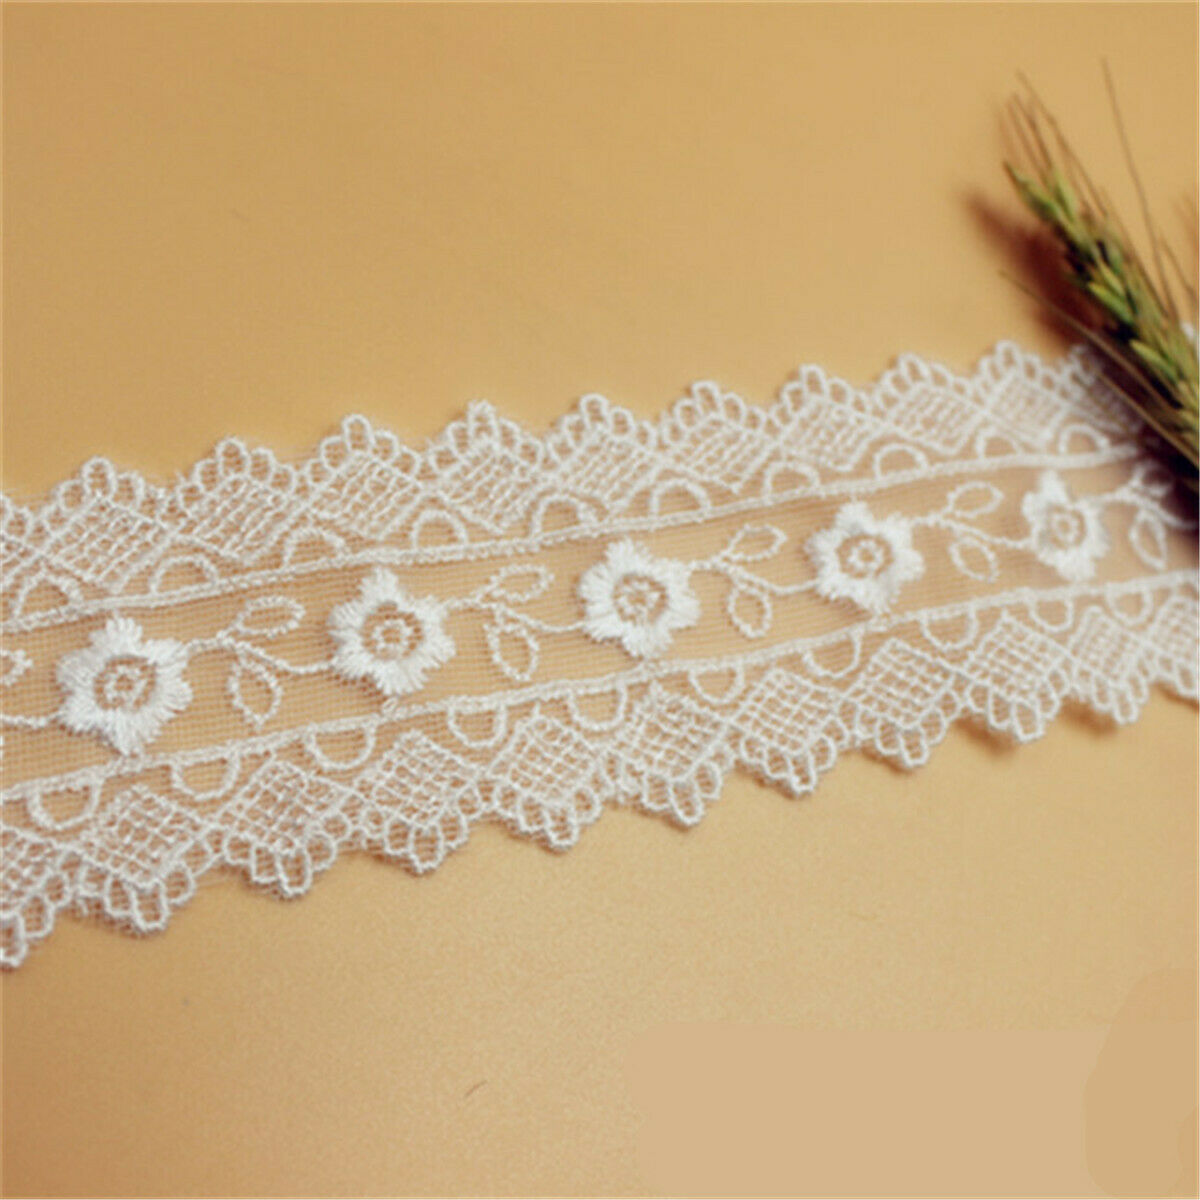 1 Yard White Embroidery Floral Cotton Trim Lace Edge Trims Craft Sewing Edging